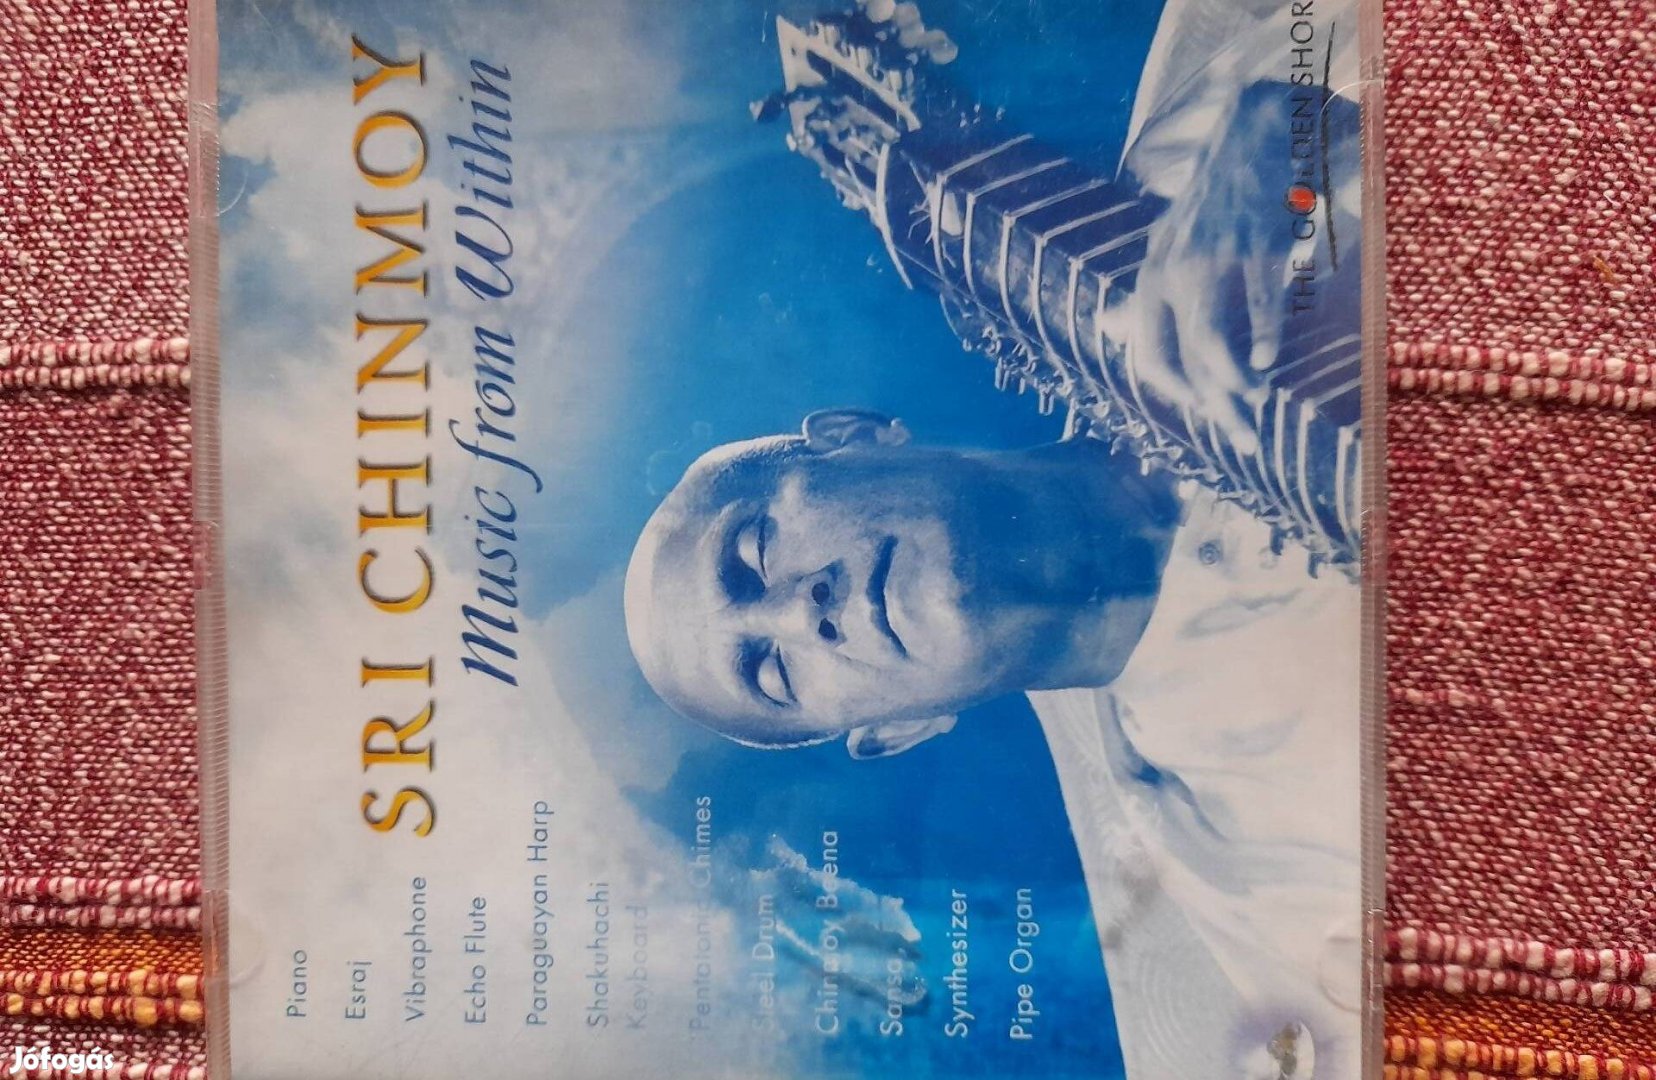 SRI Chimnoy Music FROM Within